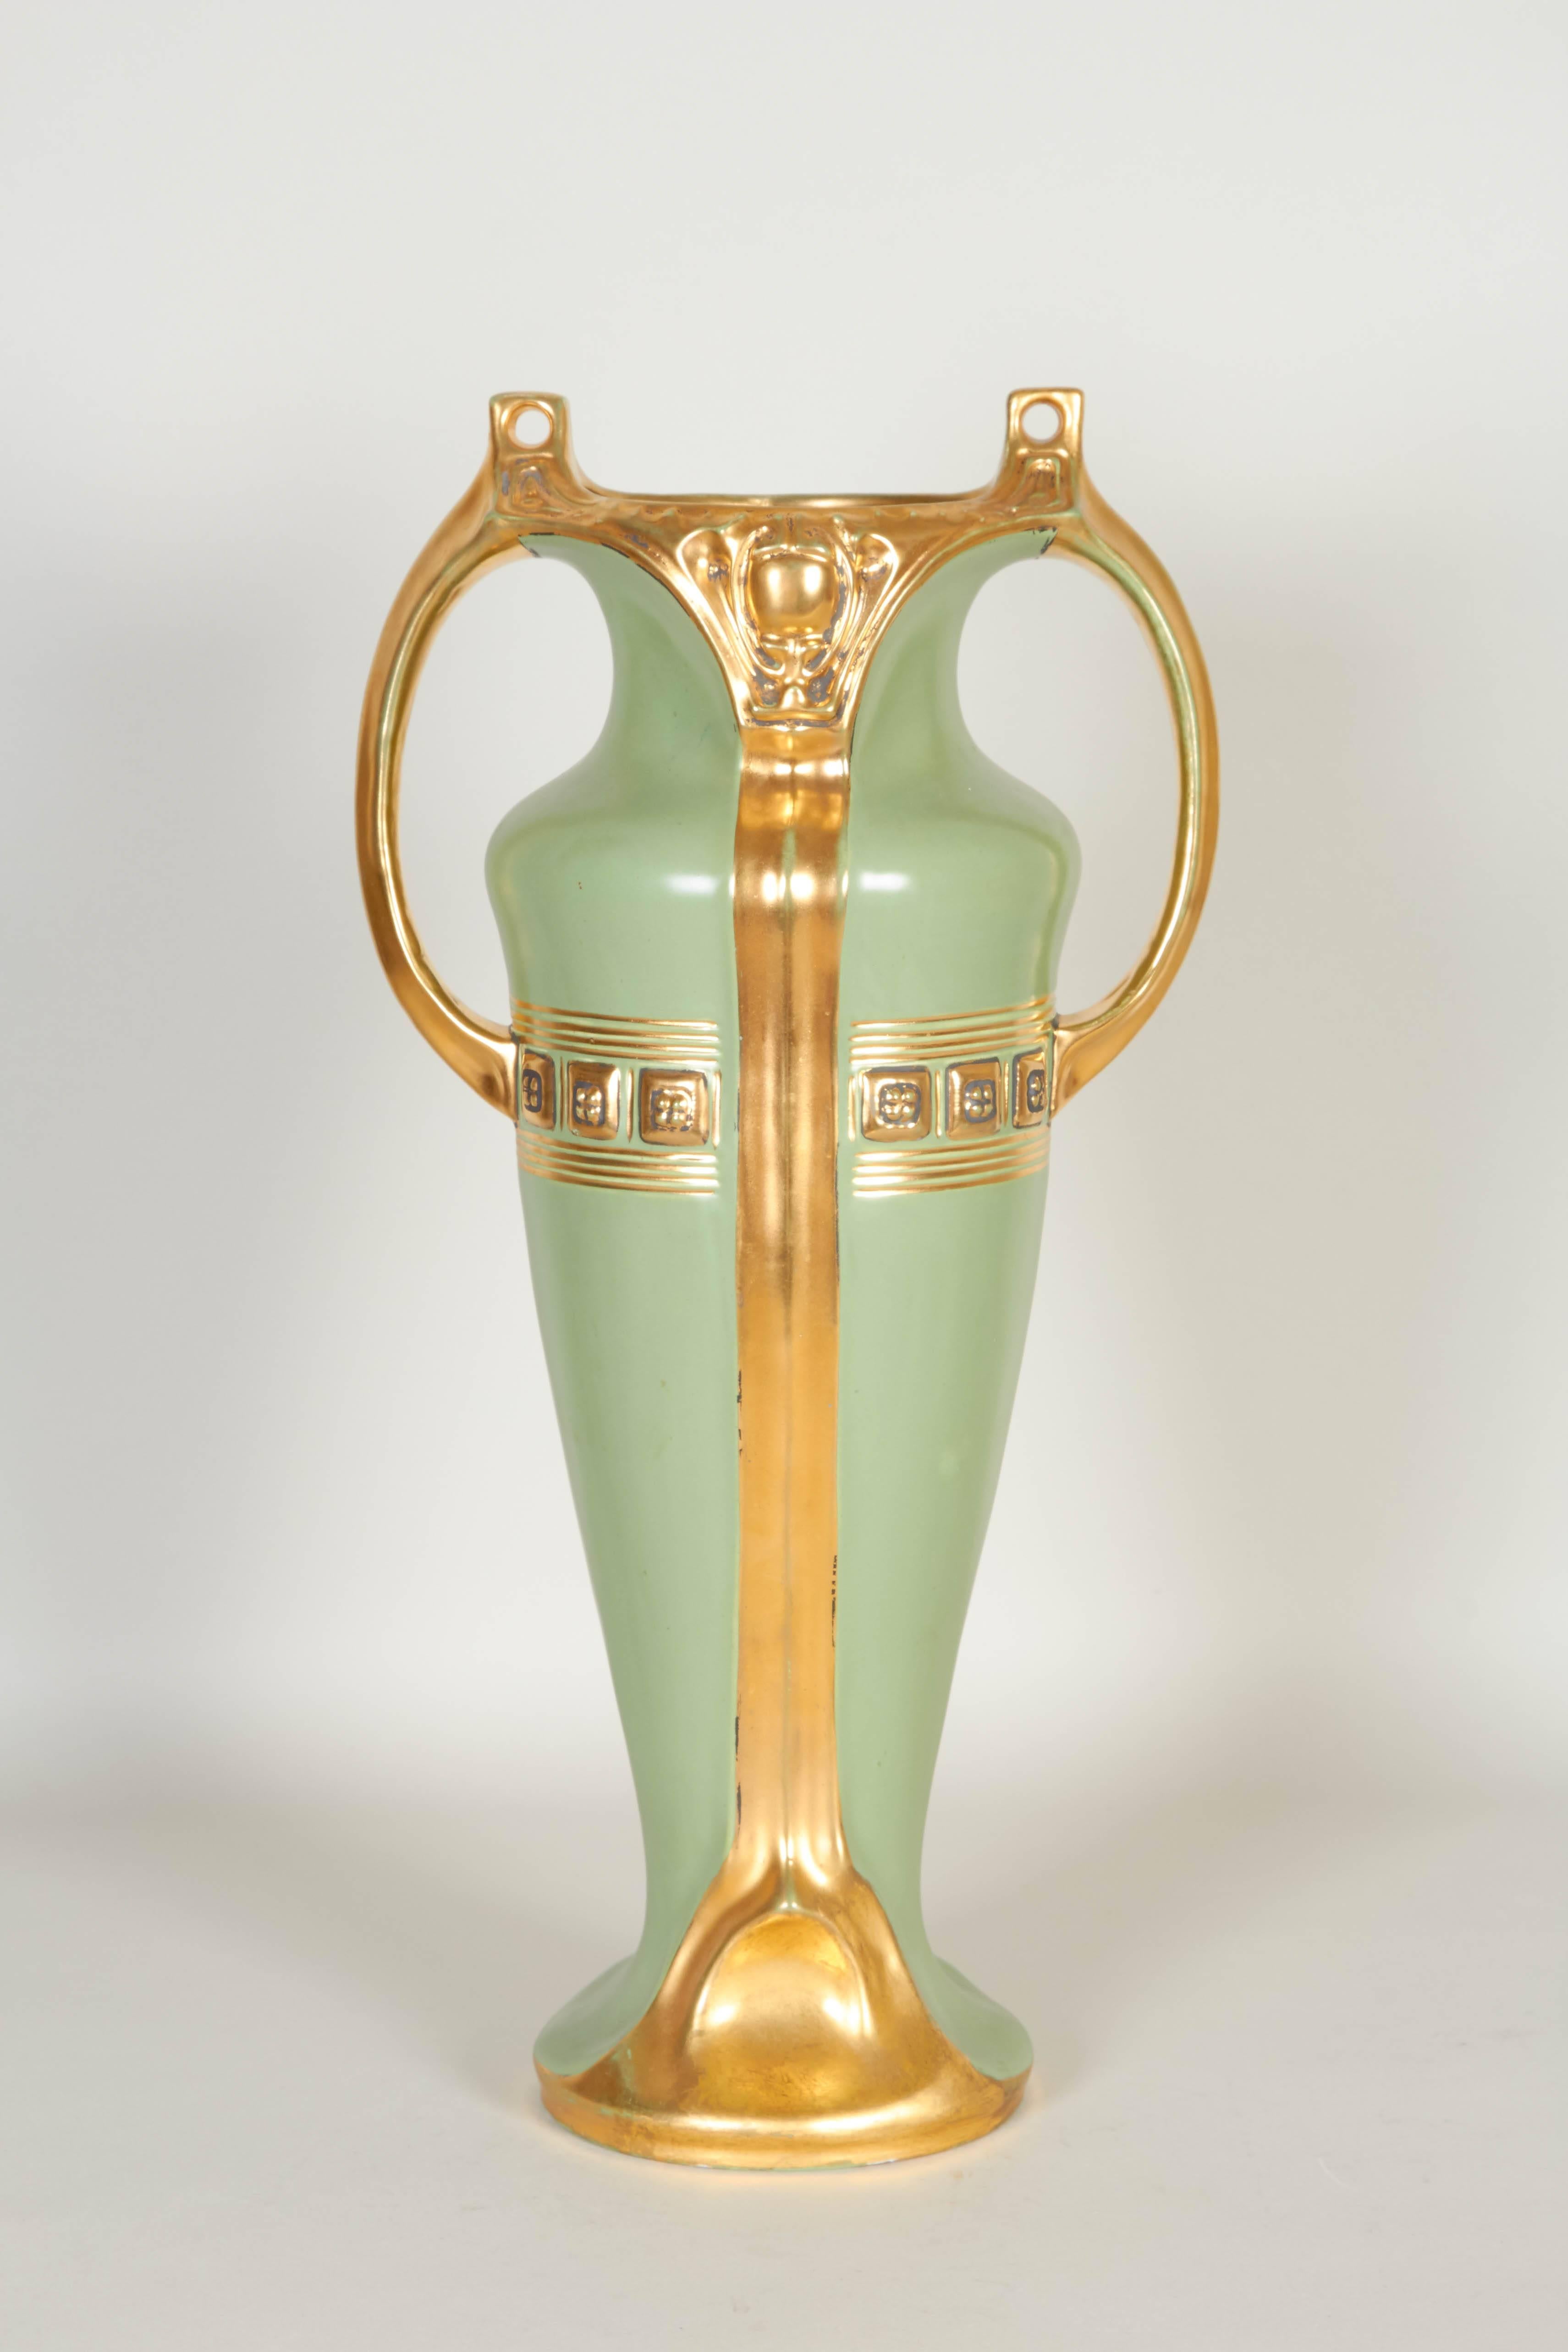 An early 20th century Austrian handled porcelain vase, designed in the Greek Revival style, urn form with green matte glaze and gilding, detailed with geometric banding and designs reminiscent of the Art Nouveau era. Markings include [Austria/ 1142]